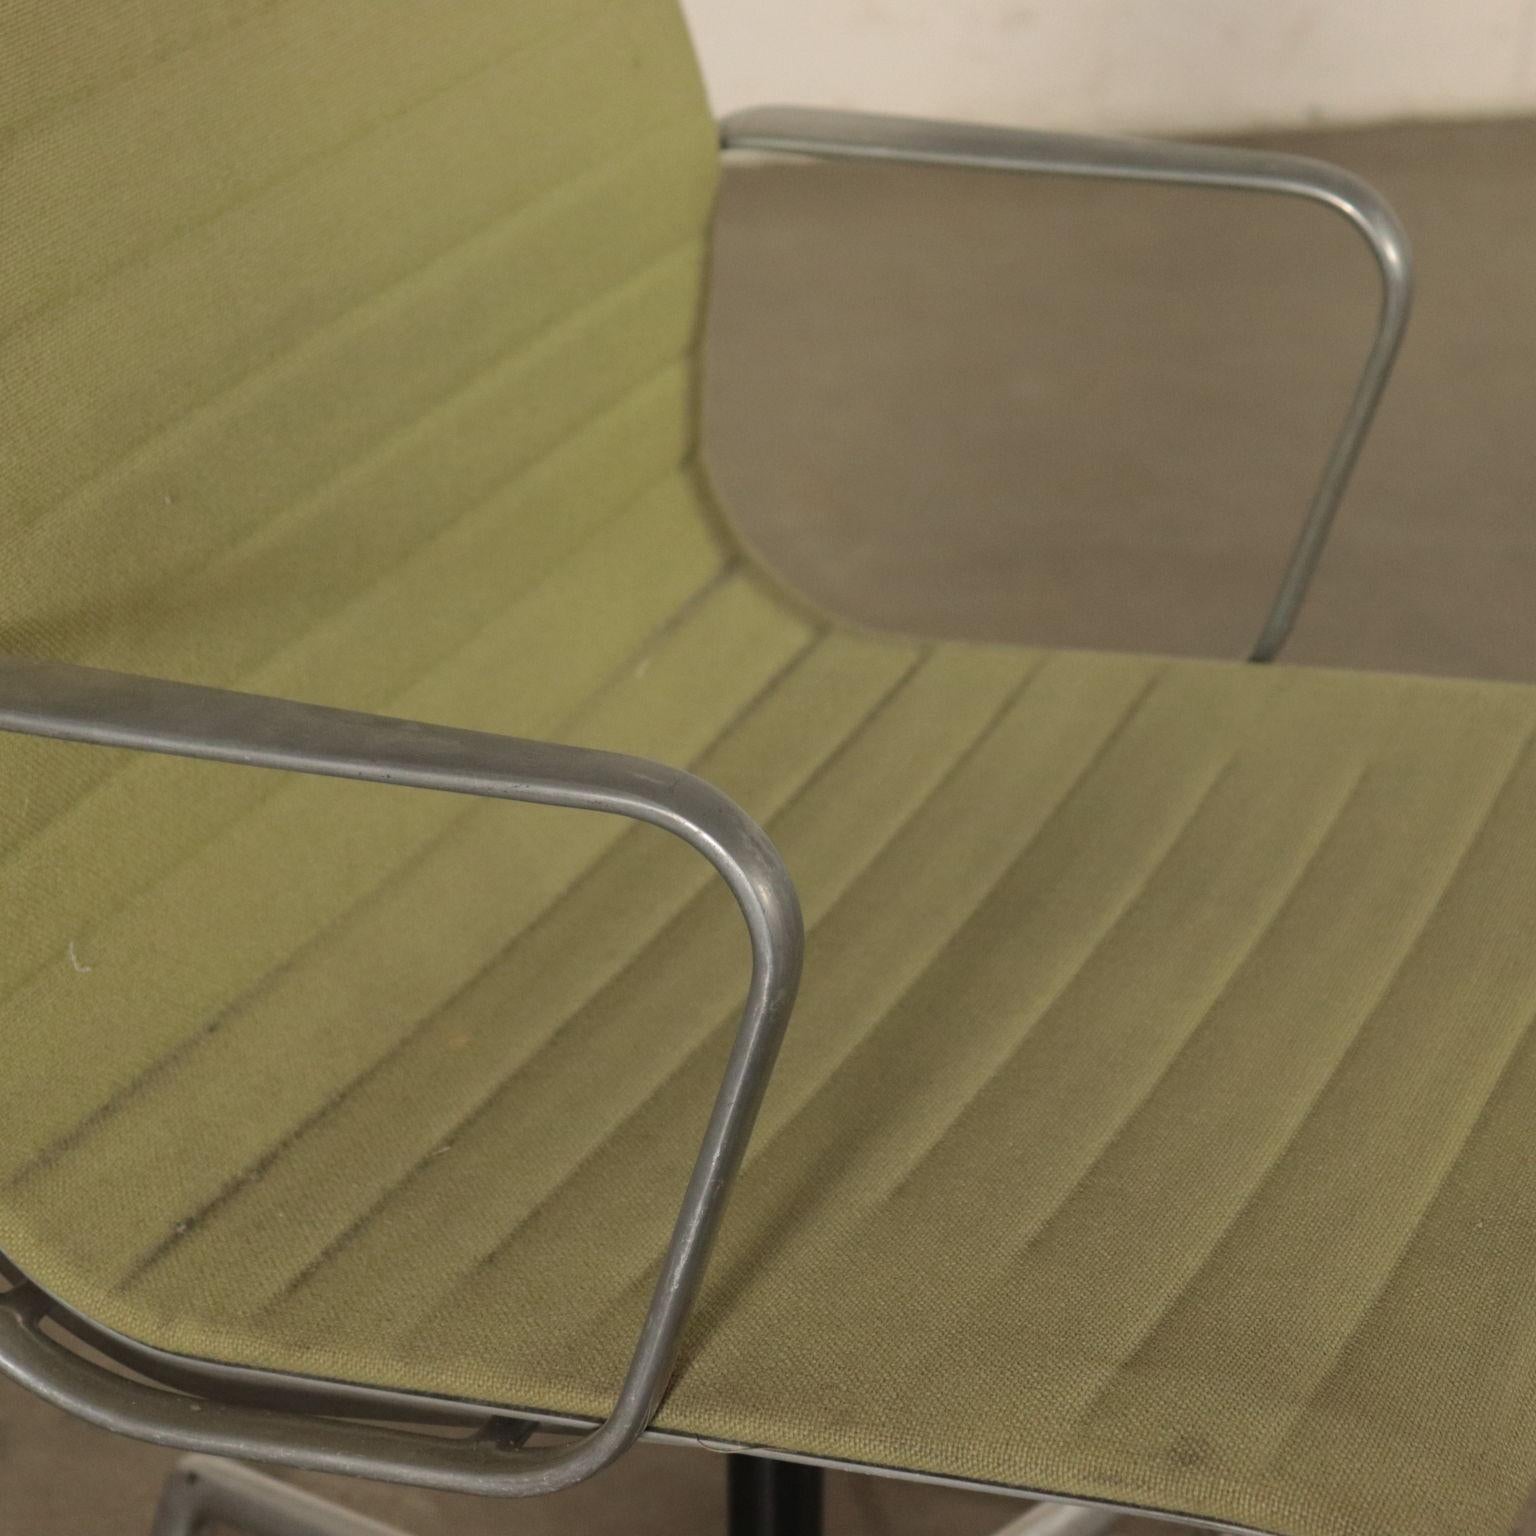 Other Chairs, Aluminum and Fabric, 1970s Charls & Ray Eames, Herman Miller